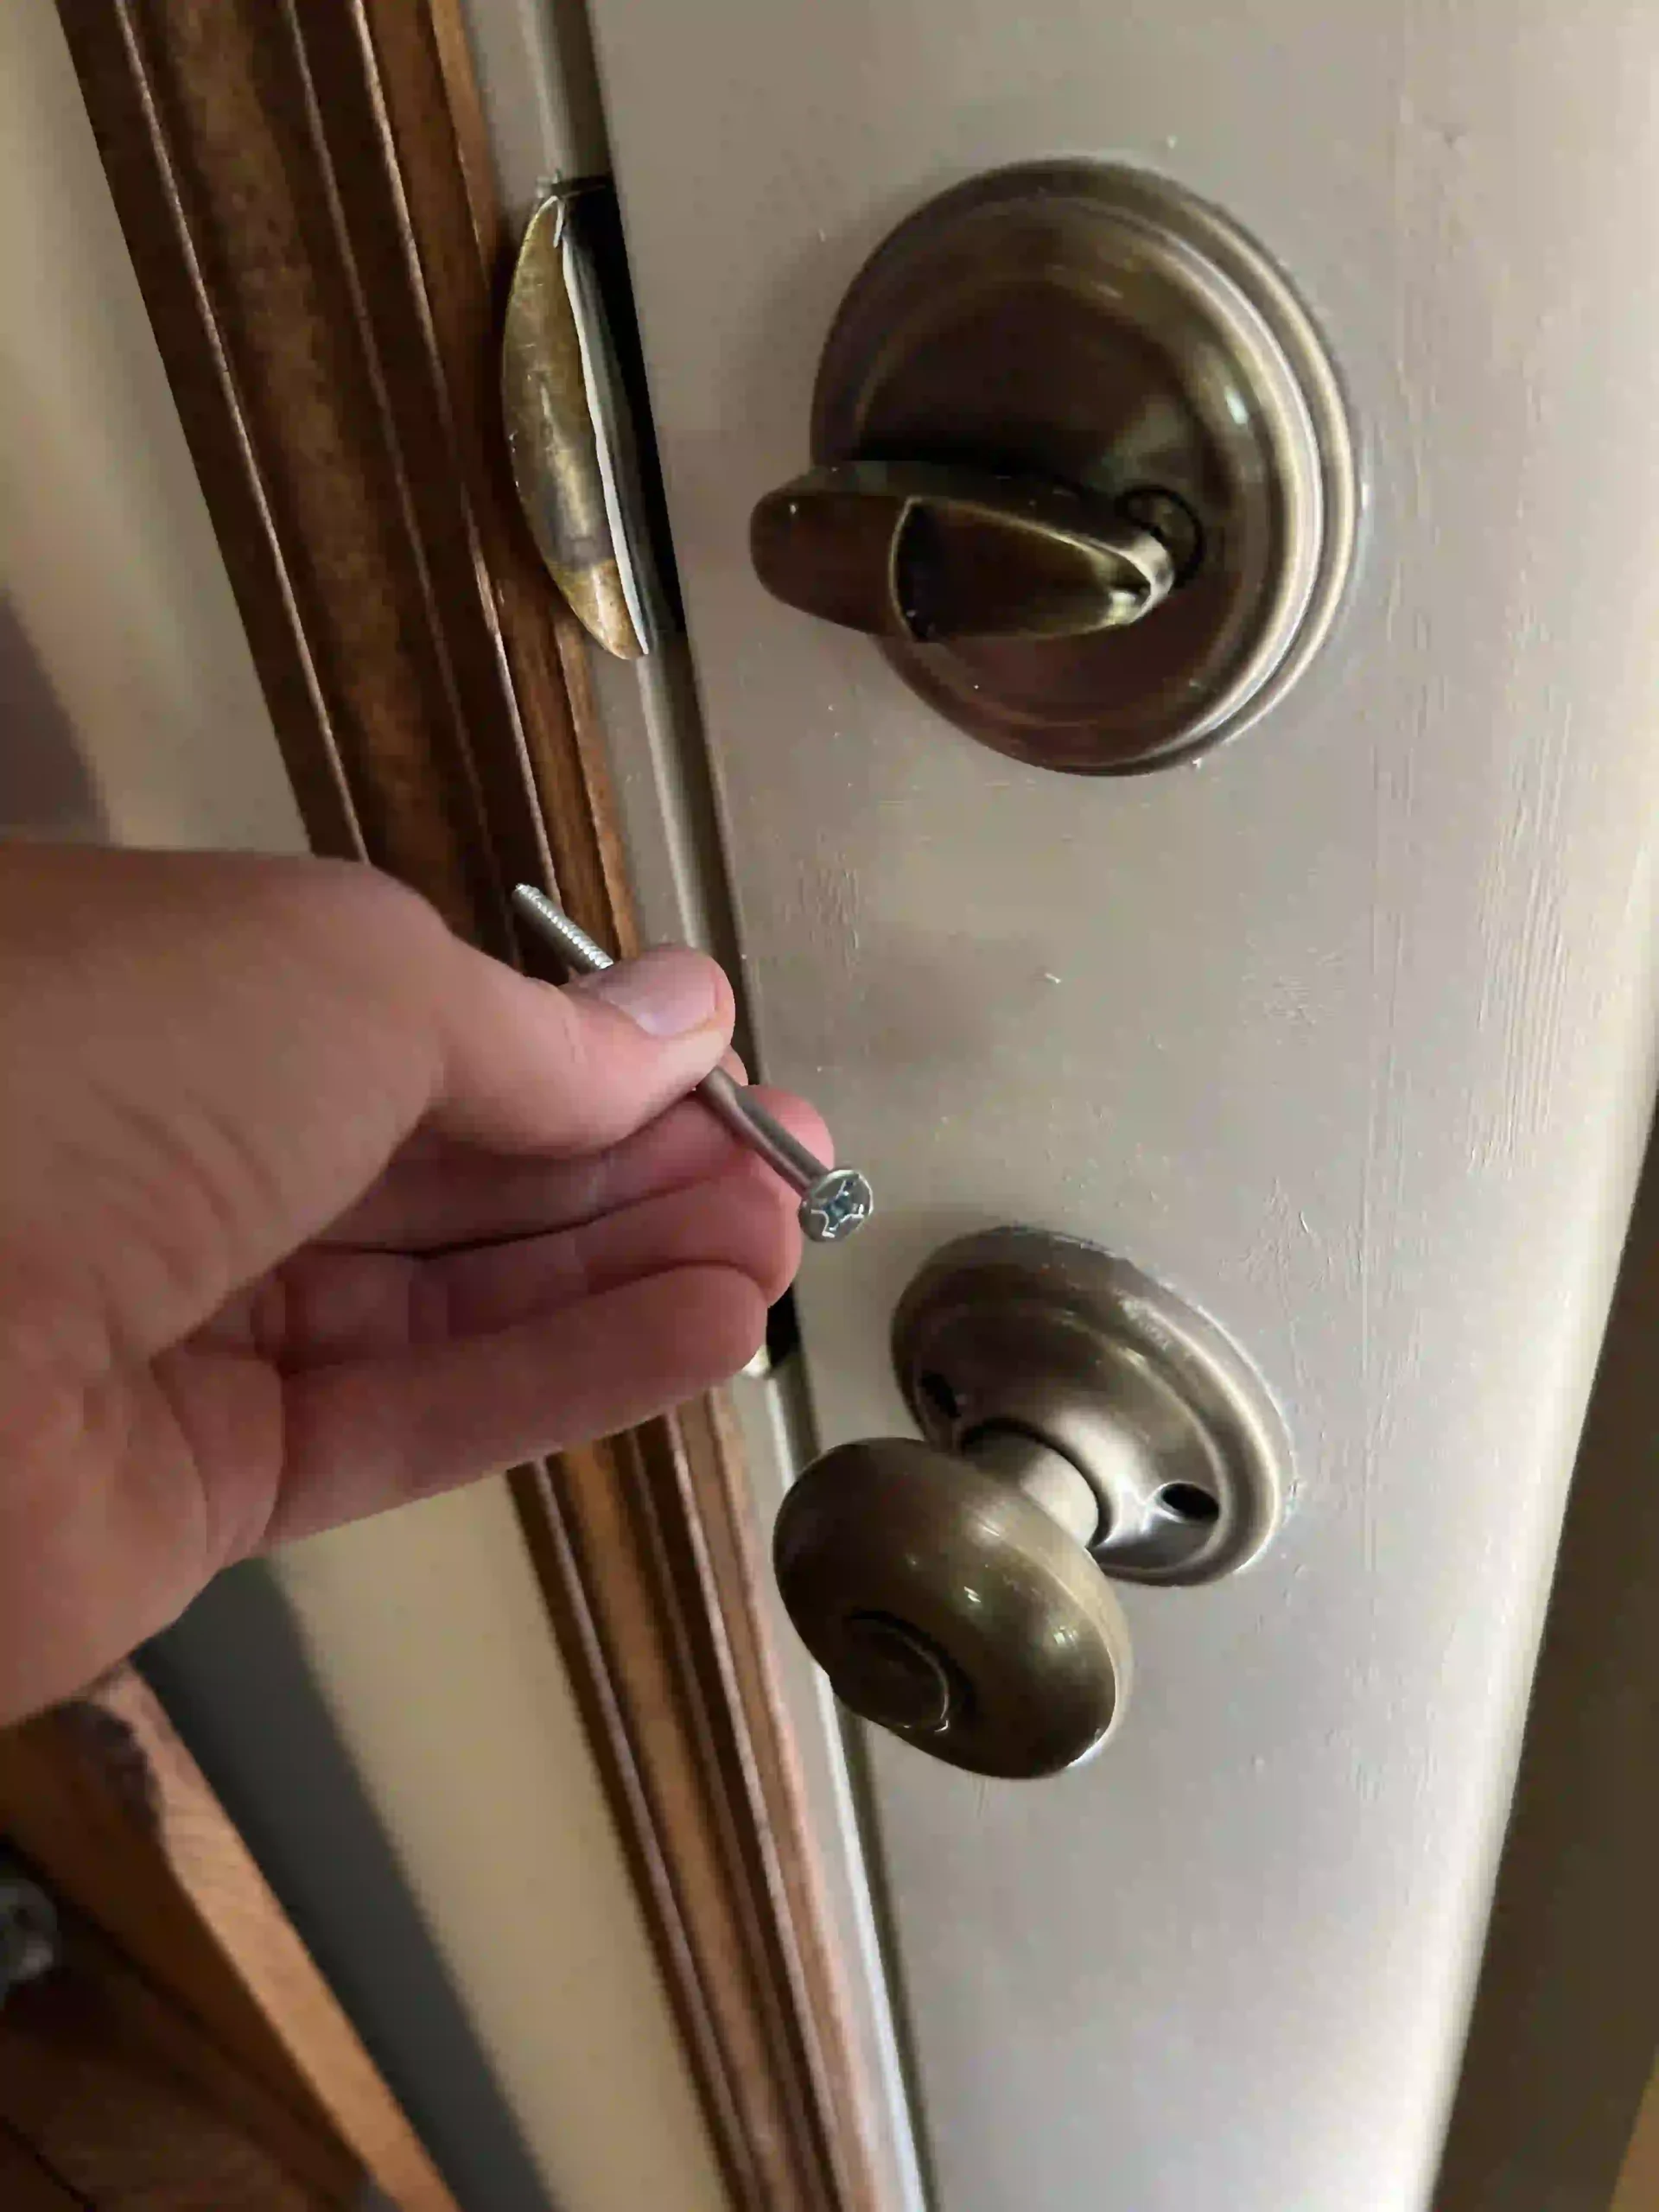 7 Entrance Door Lock Problems and How To Fix Them Quickly